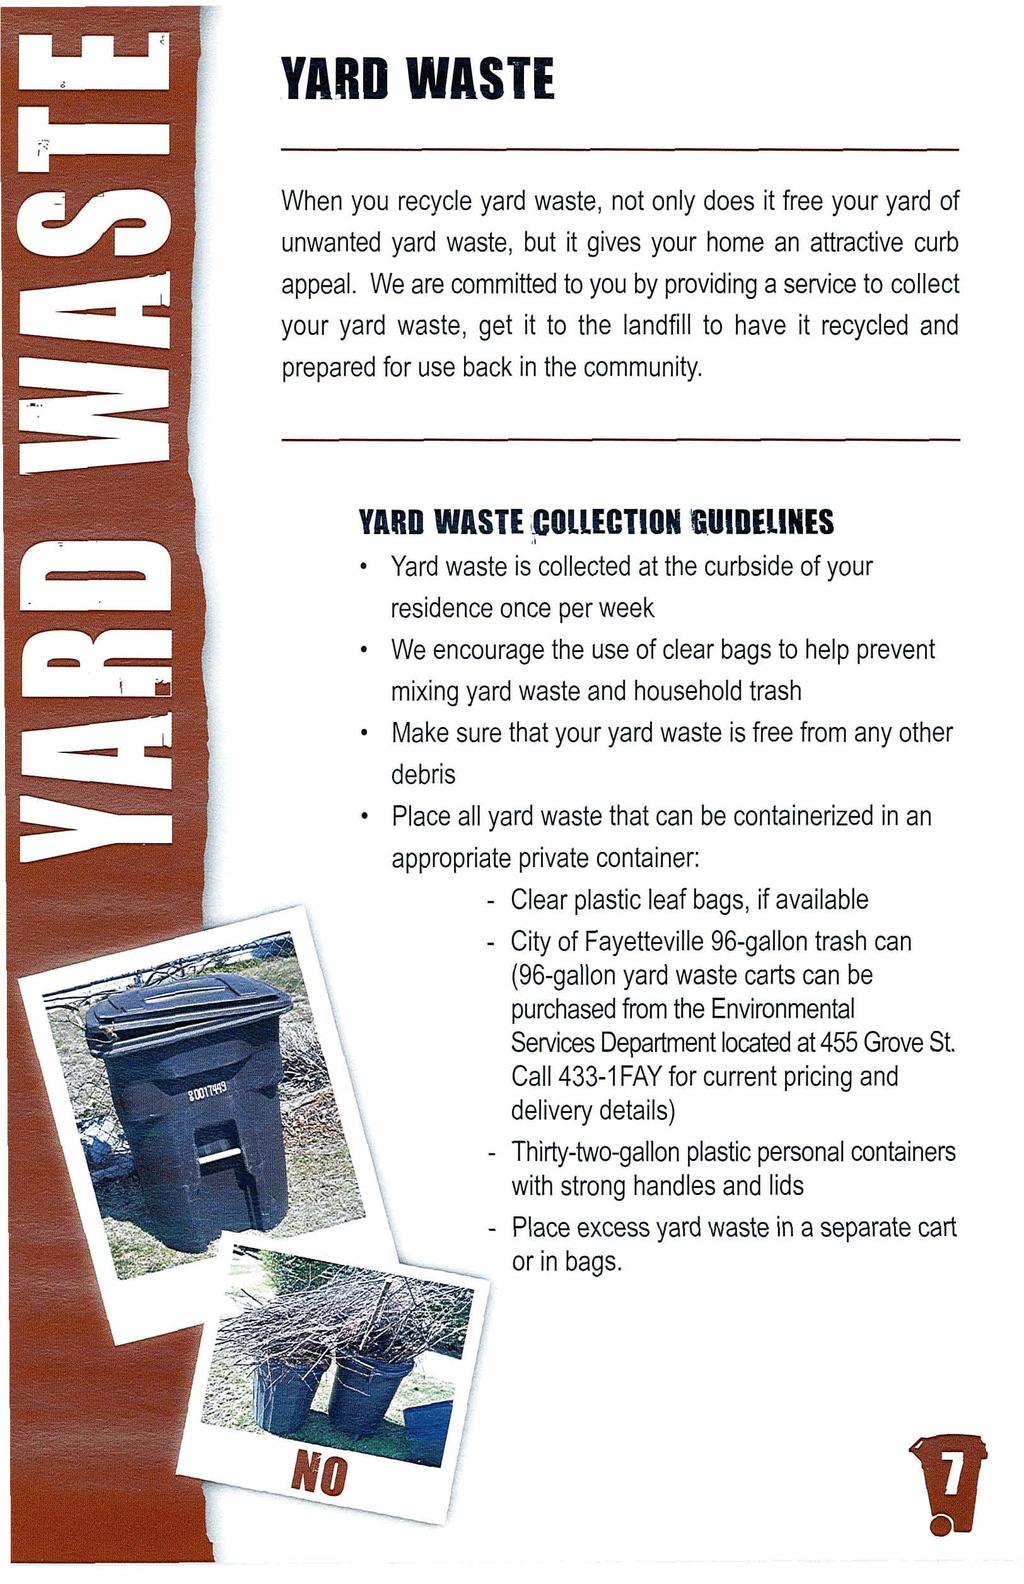 YARD WASTE,COLLECTIOW lliuloeliwes Yard waste is collected at the curbside of your residence once per week We encourage the use of clear bags to help prevent mixing yard waste and household trash